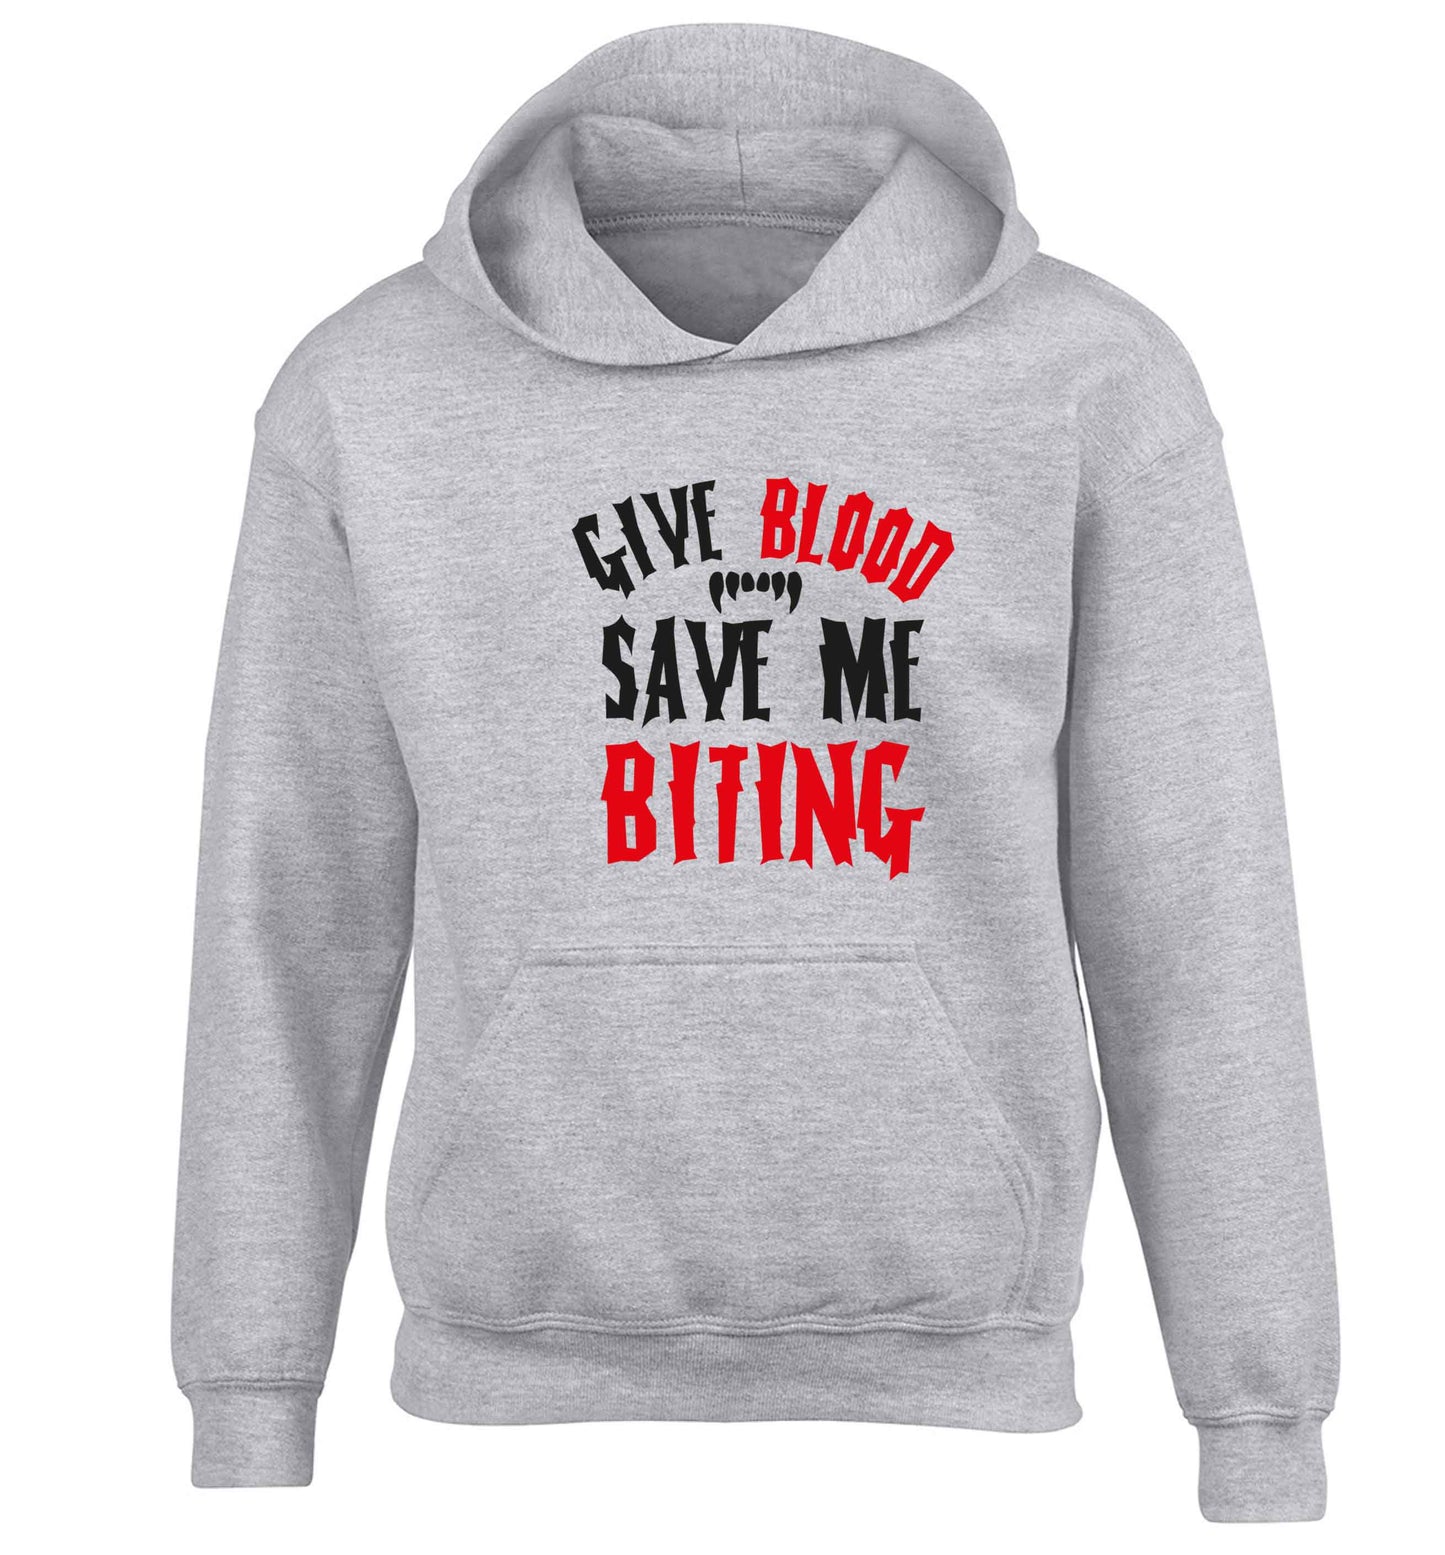 Give blood save me biting children's grey hoodie 12-13 Years